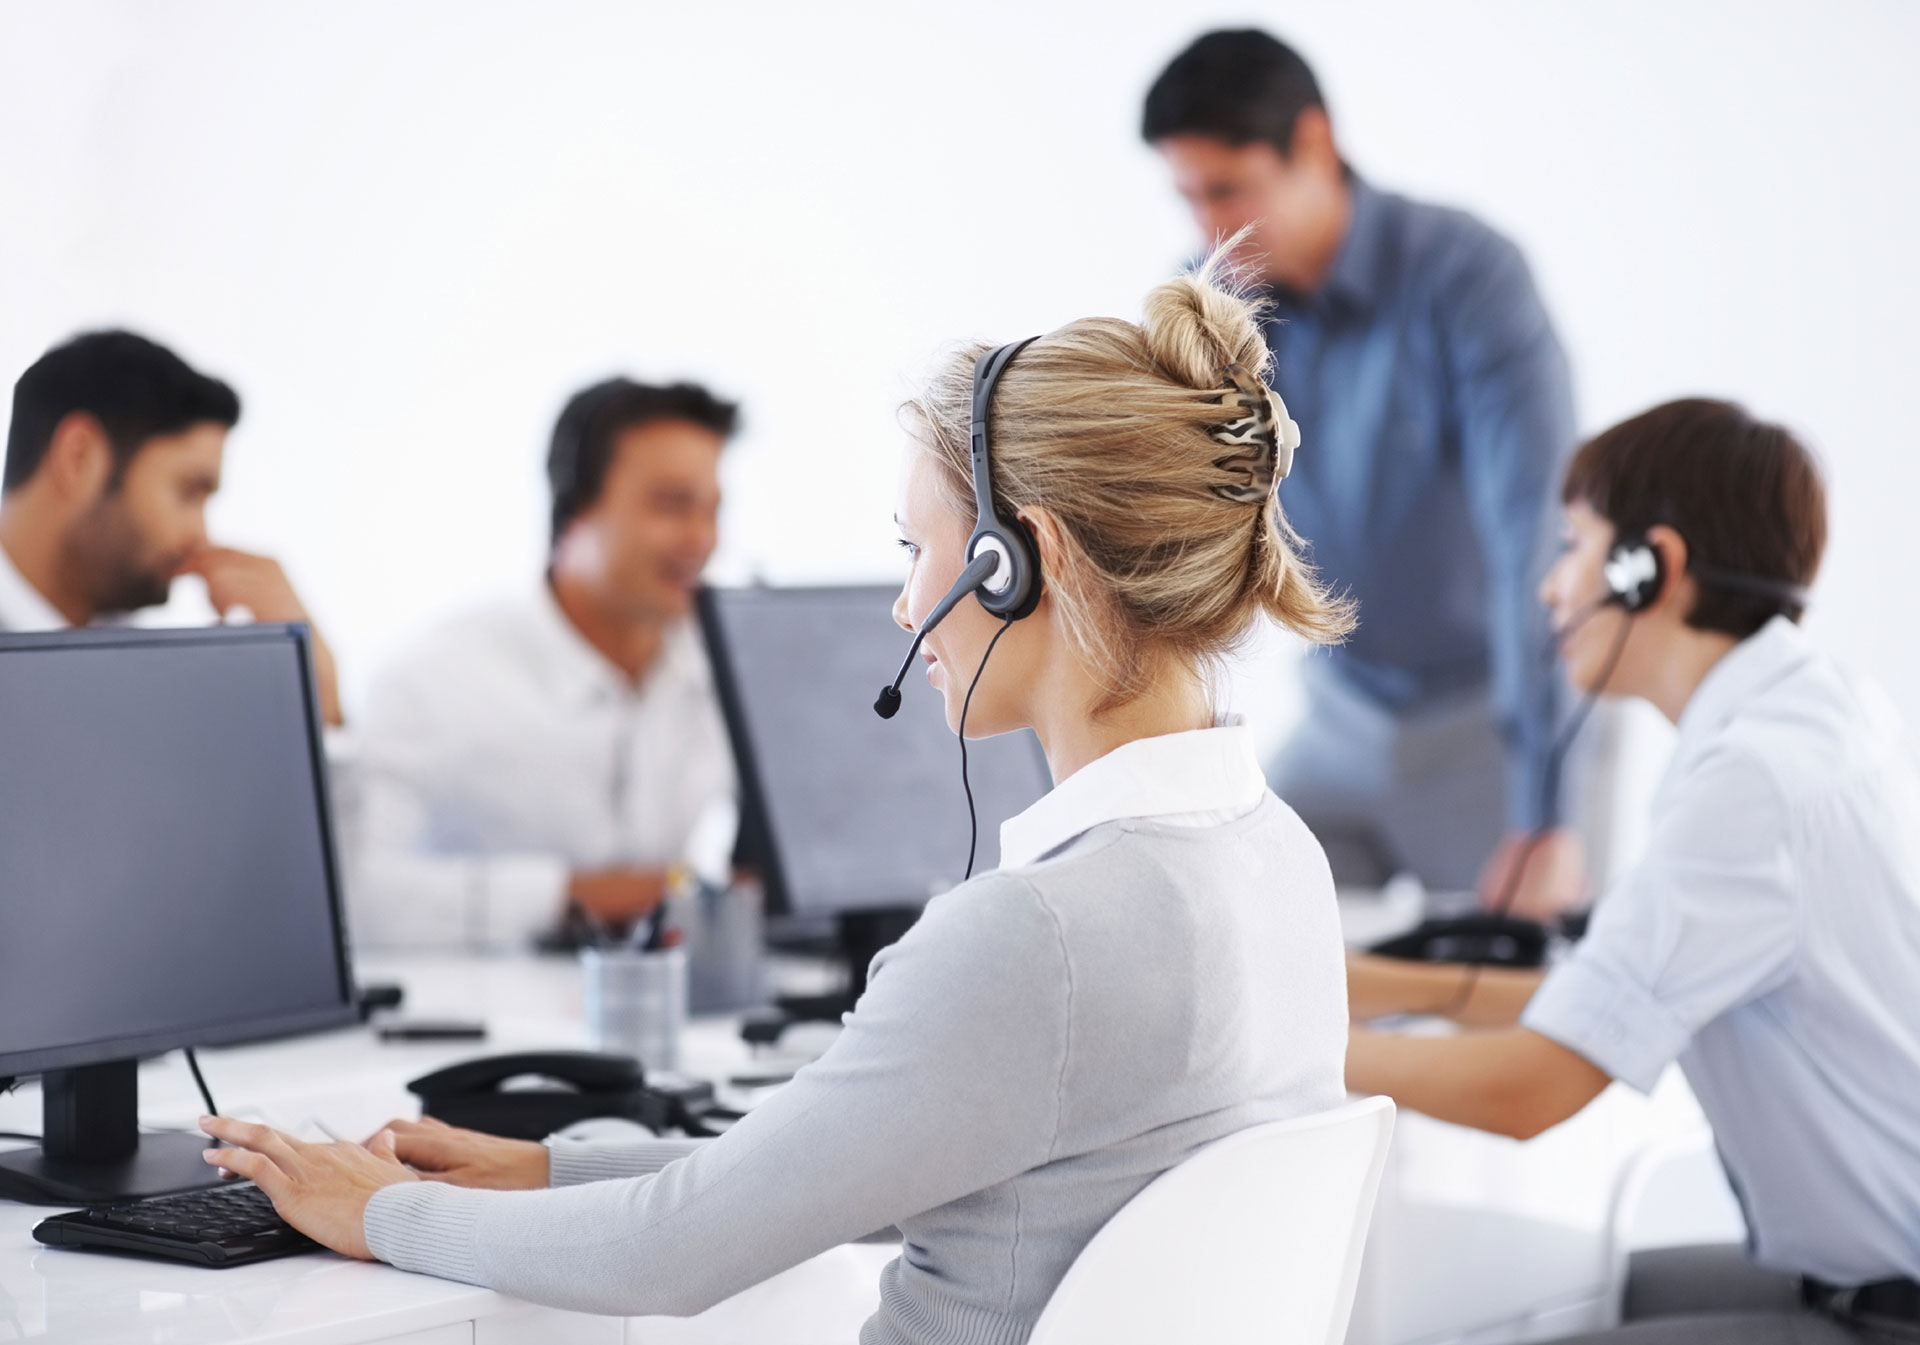 call center solution providers